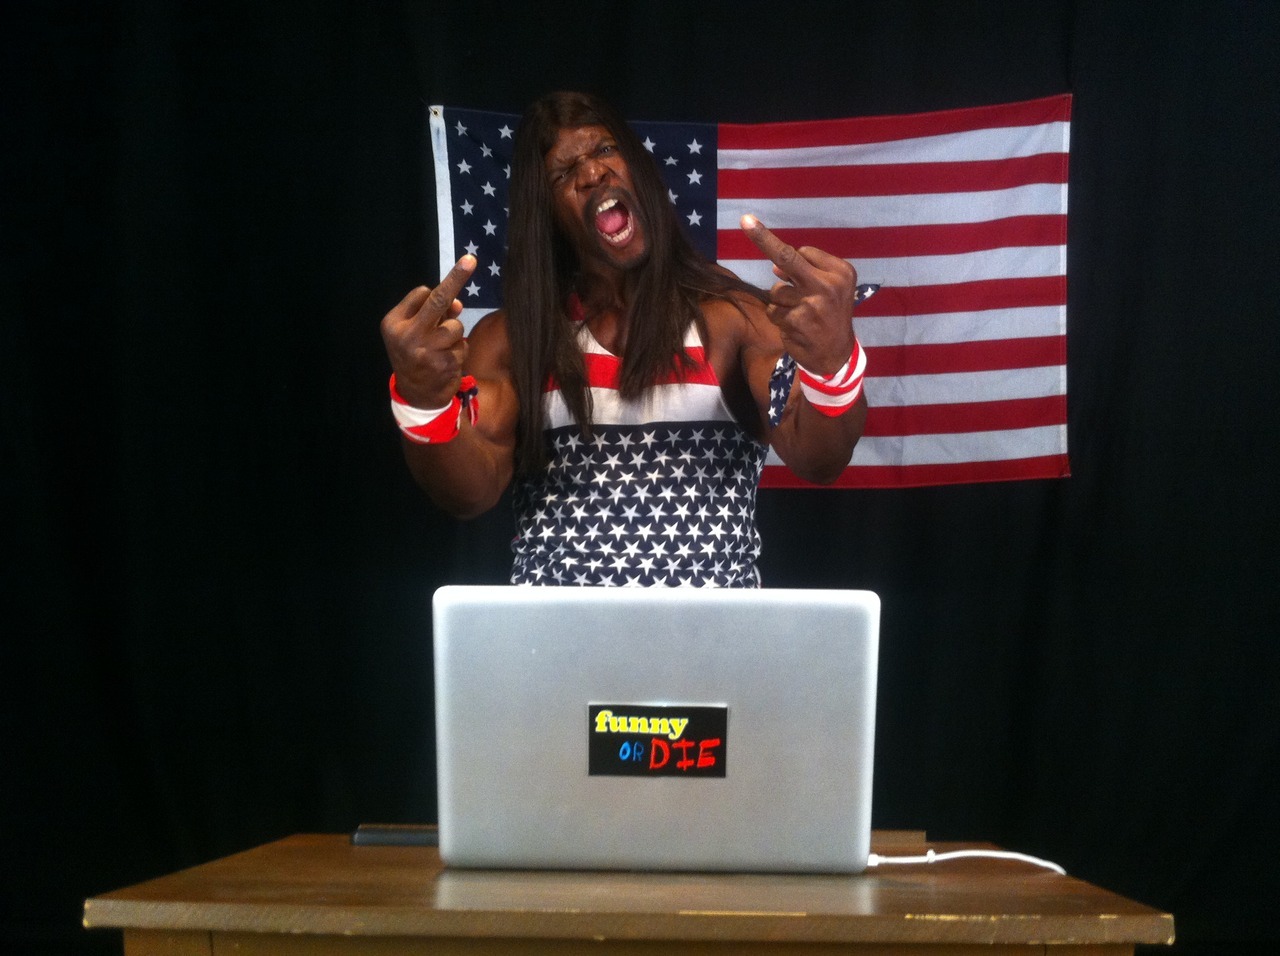 LIVE Q&A with President Camacho
President Camacho (Terry Crews) is here now, ready to talk to YOU! Tweet your questions right now to @funnyordie!